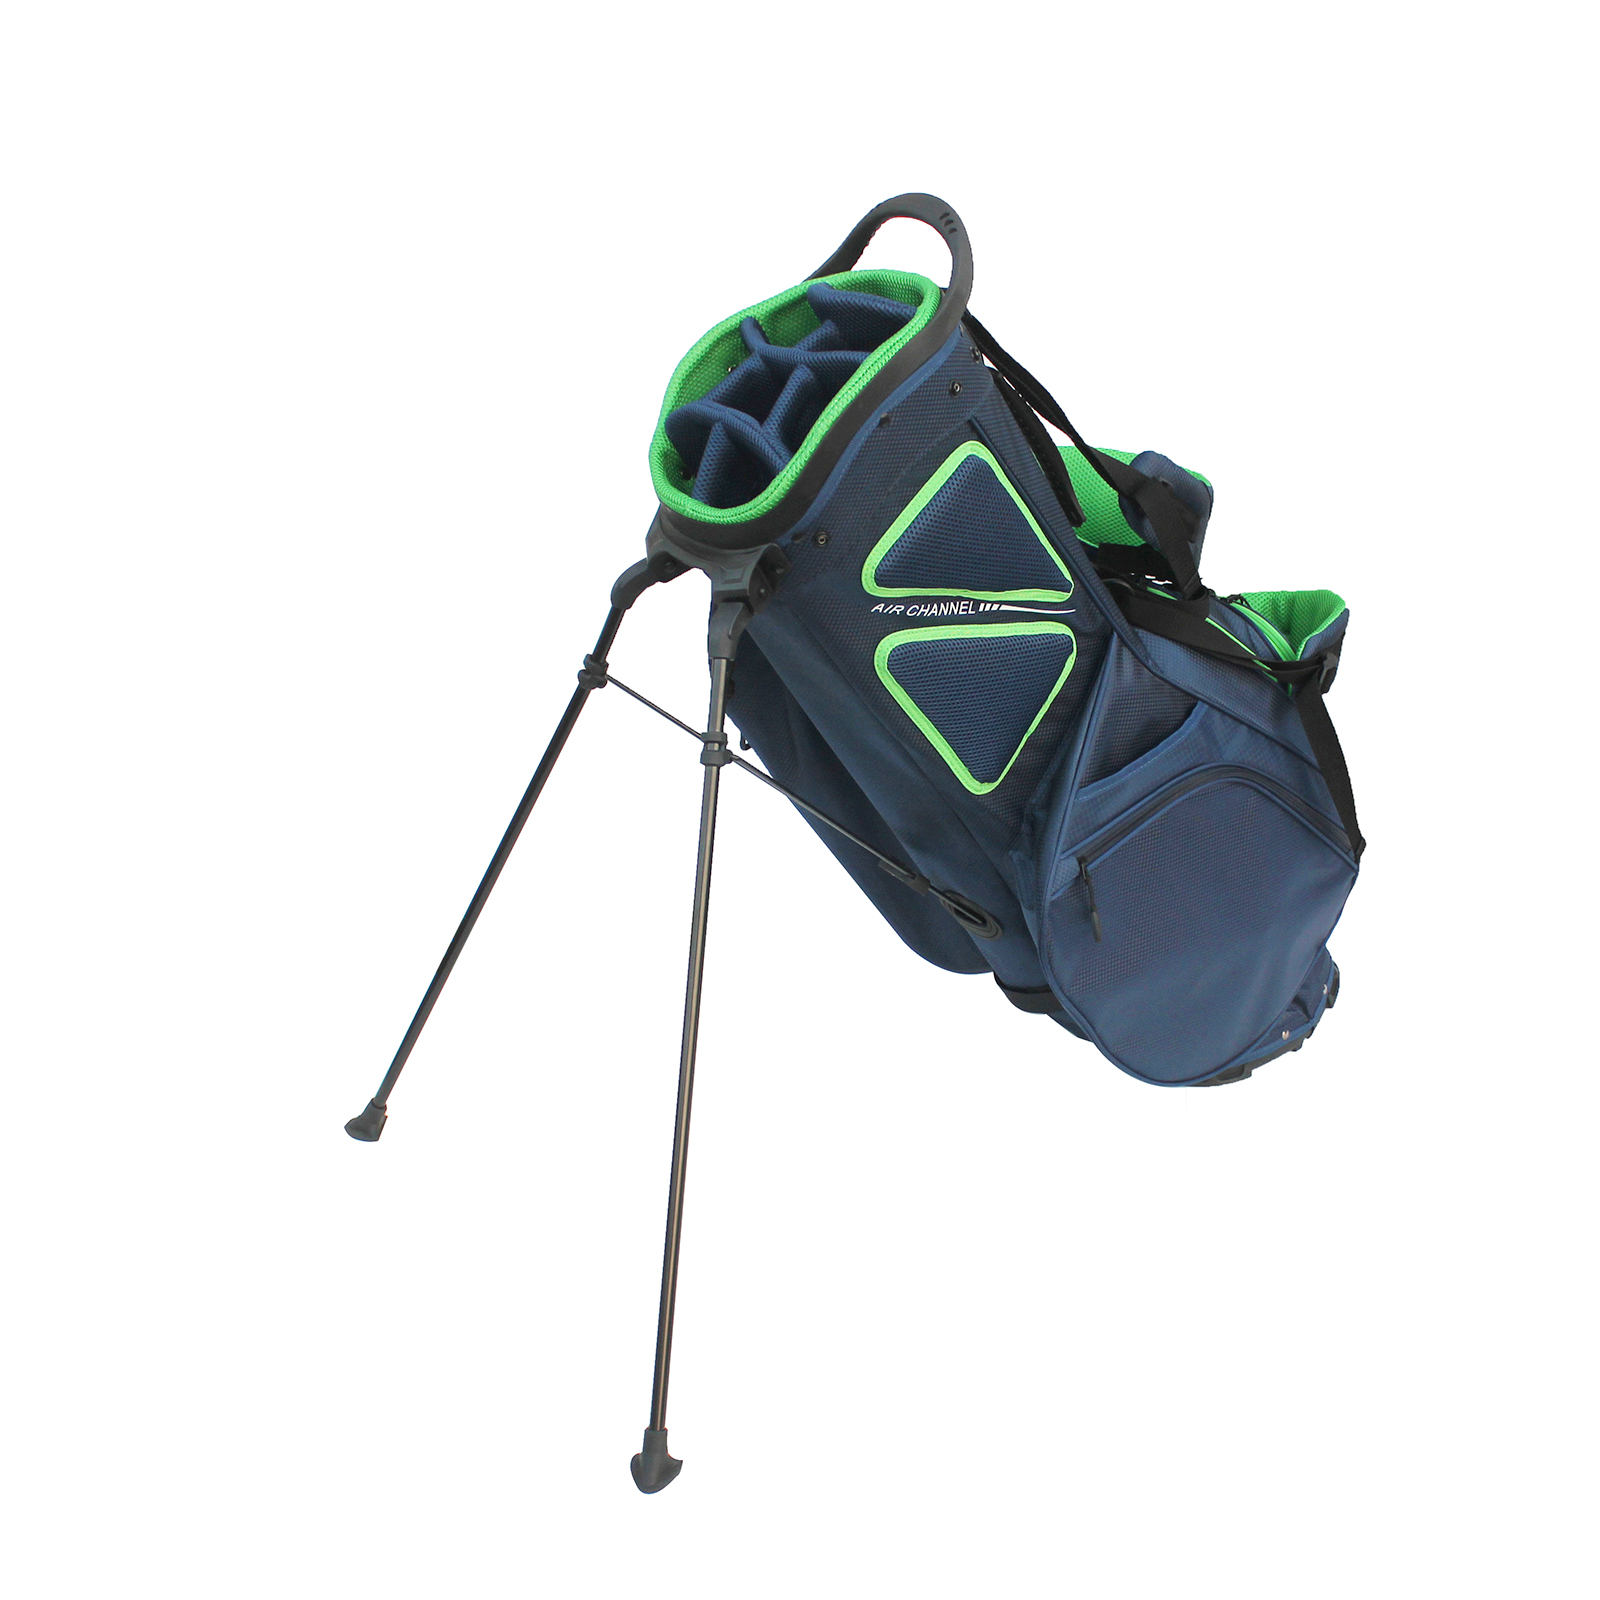 Stand bag with a sporty design